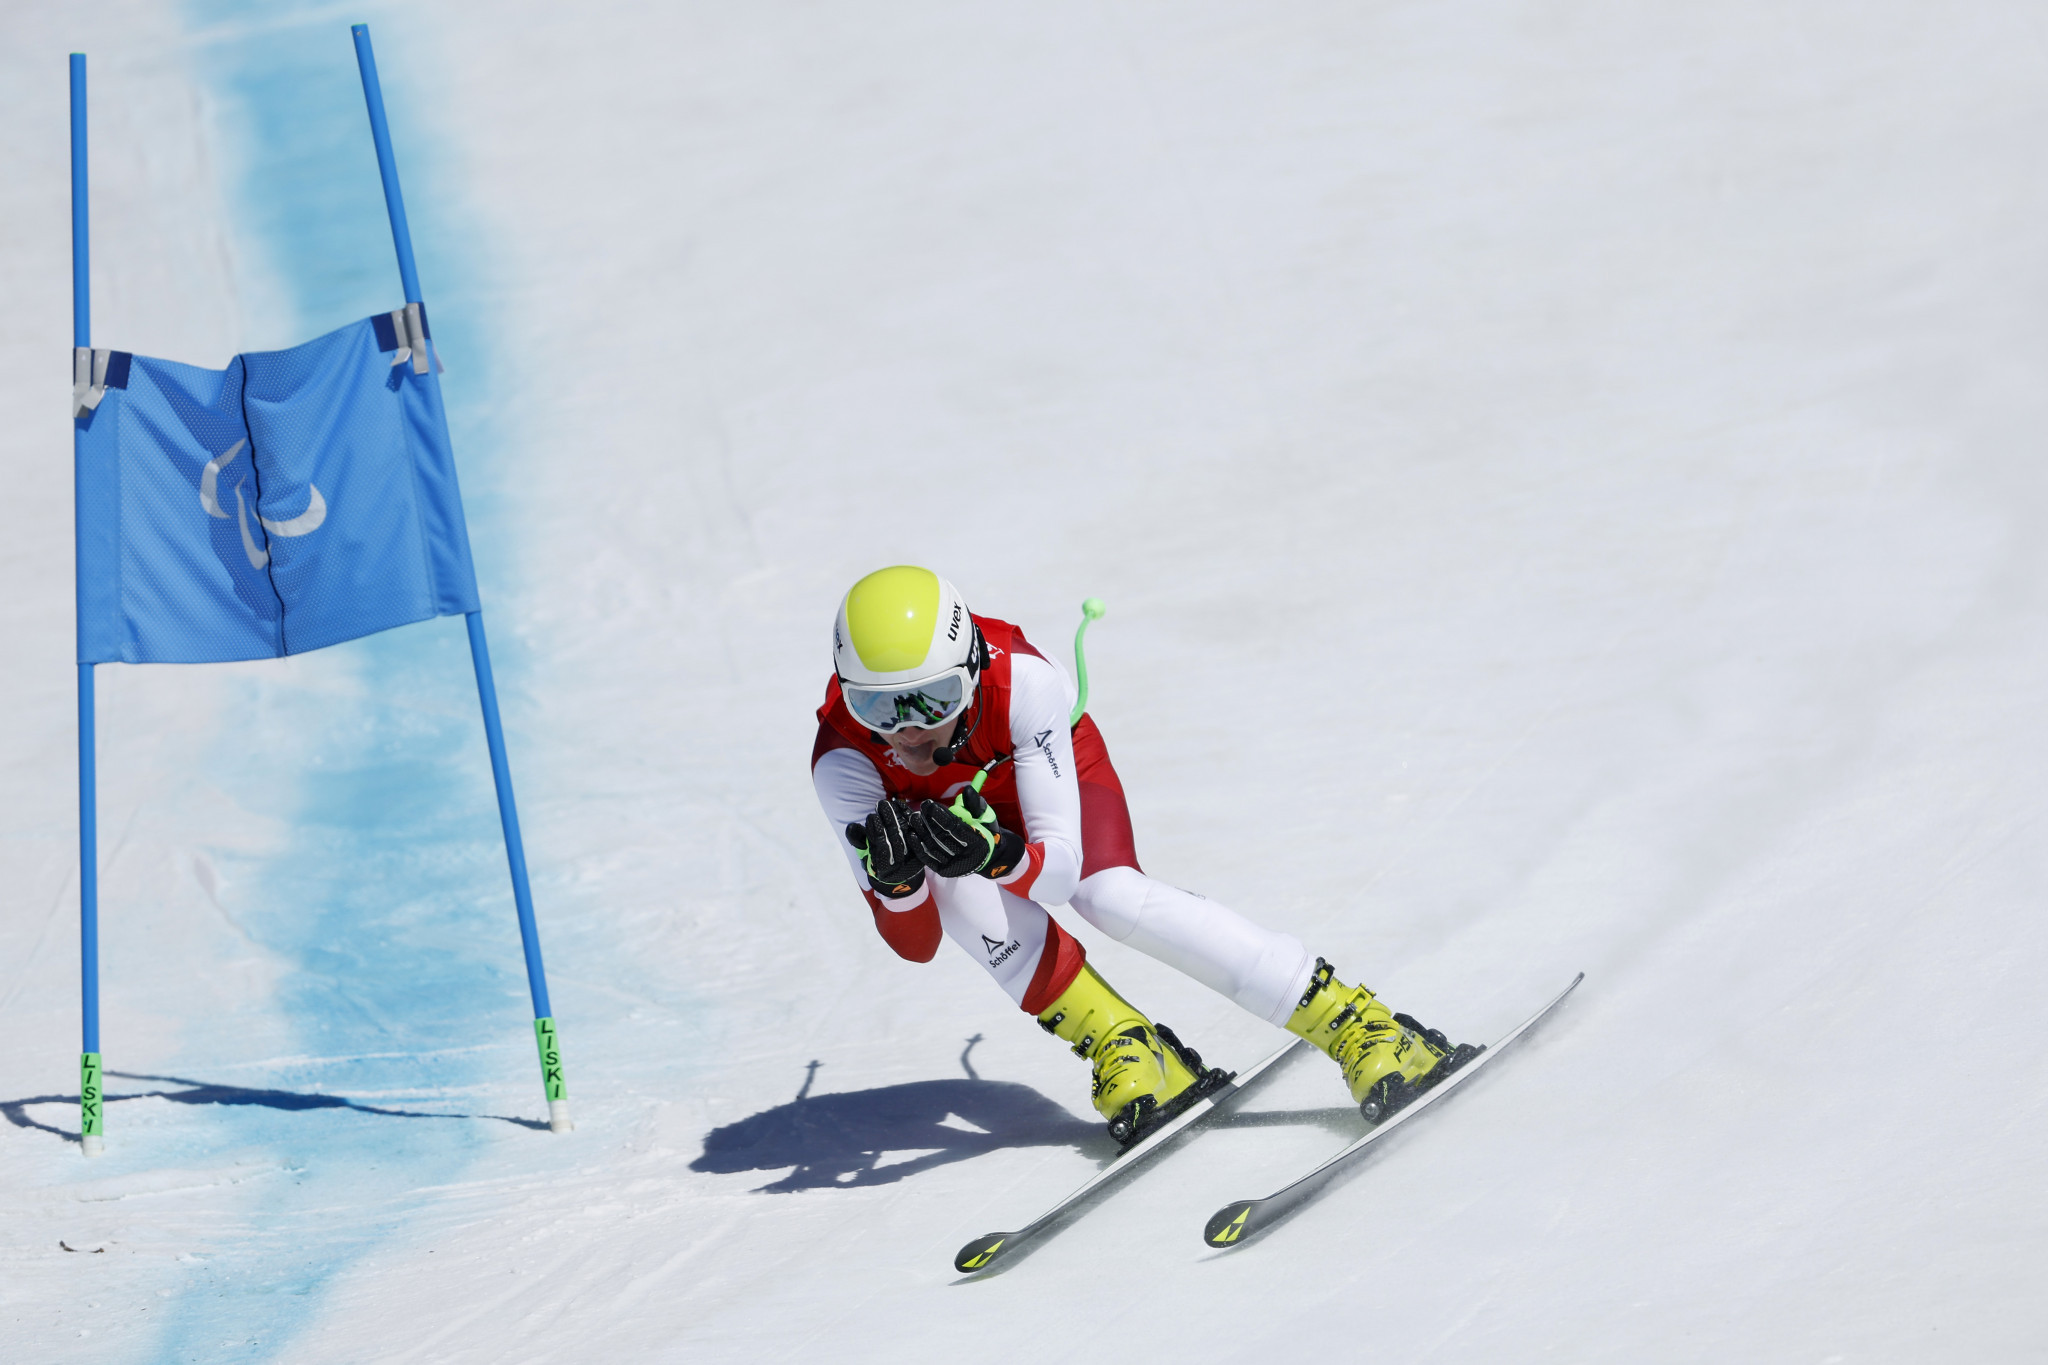 Austria's Johannes Aigner stunned the world and Paralympic champions to claim the men's vision impaired downhill title ©Getty Images